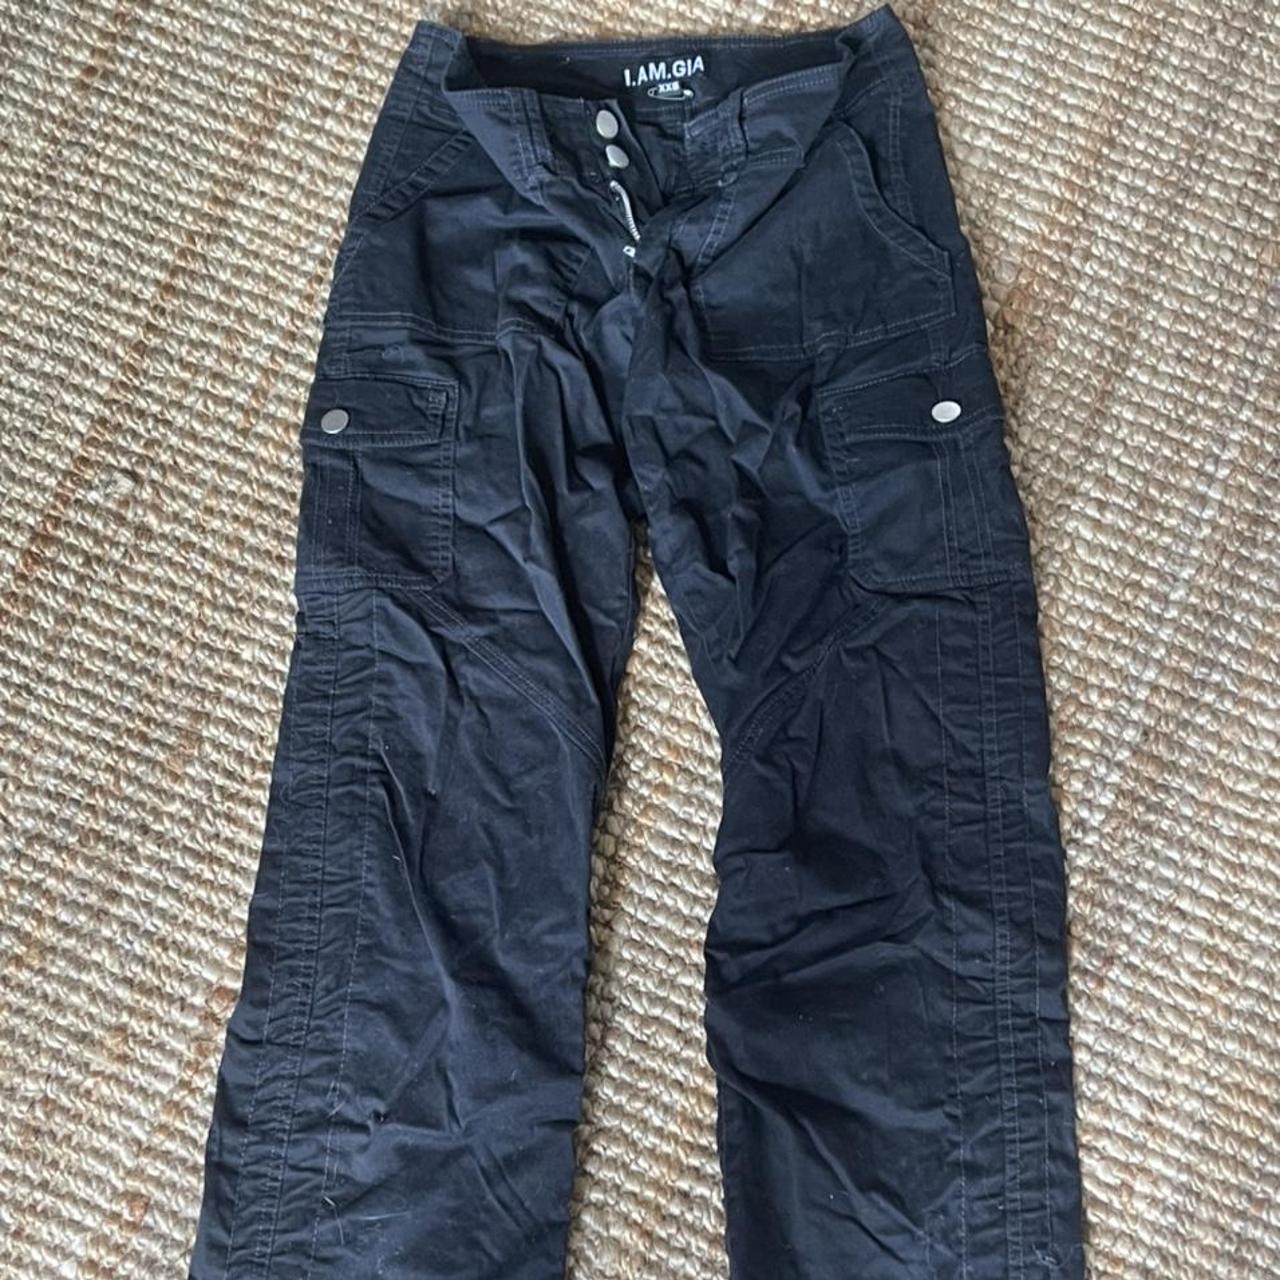 IAMGIA Black Ryder Cargo Pants Highly sought out In... - Depop